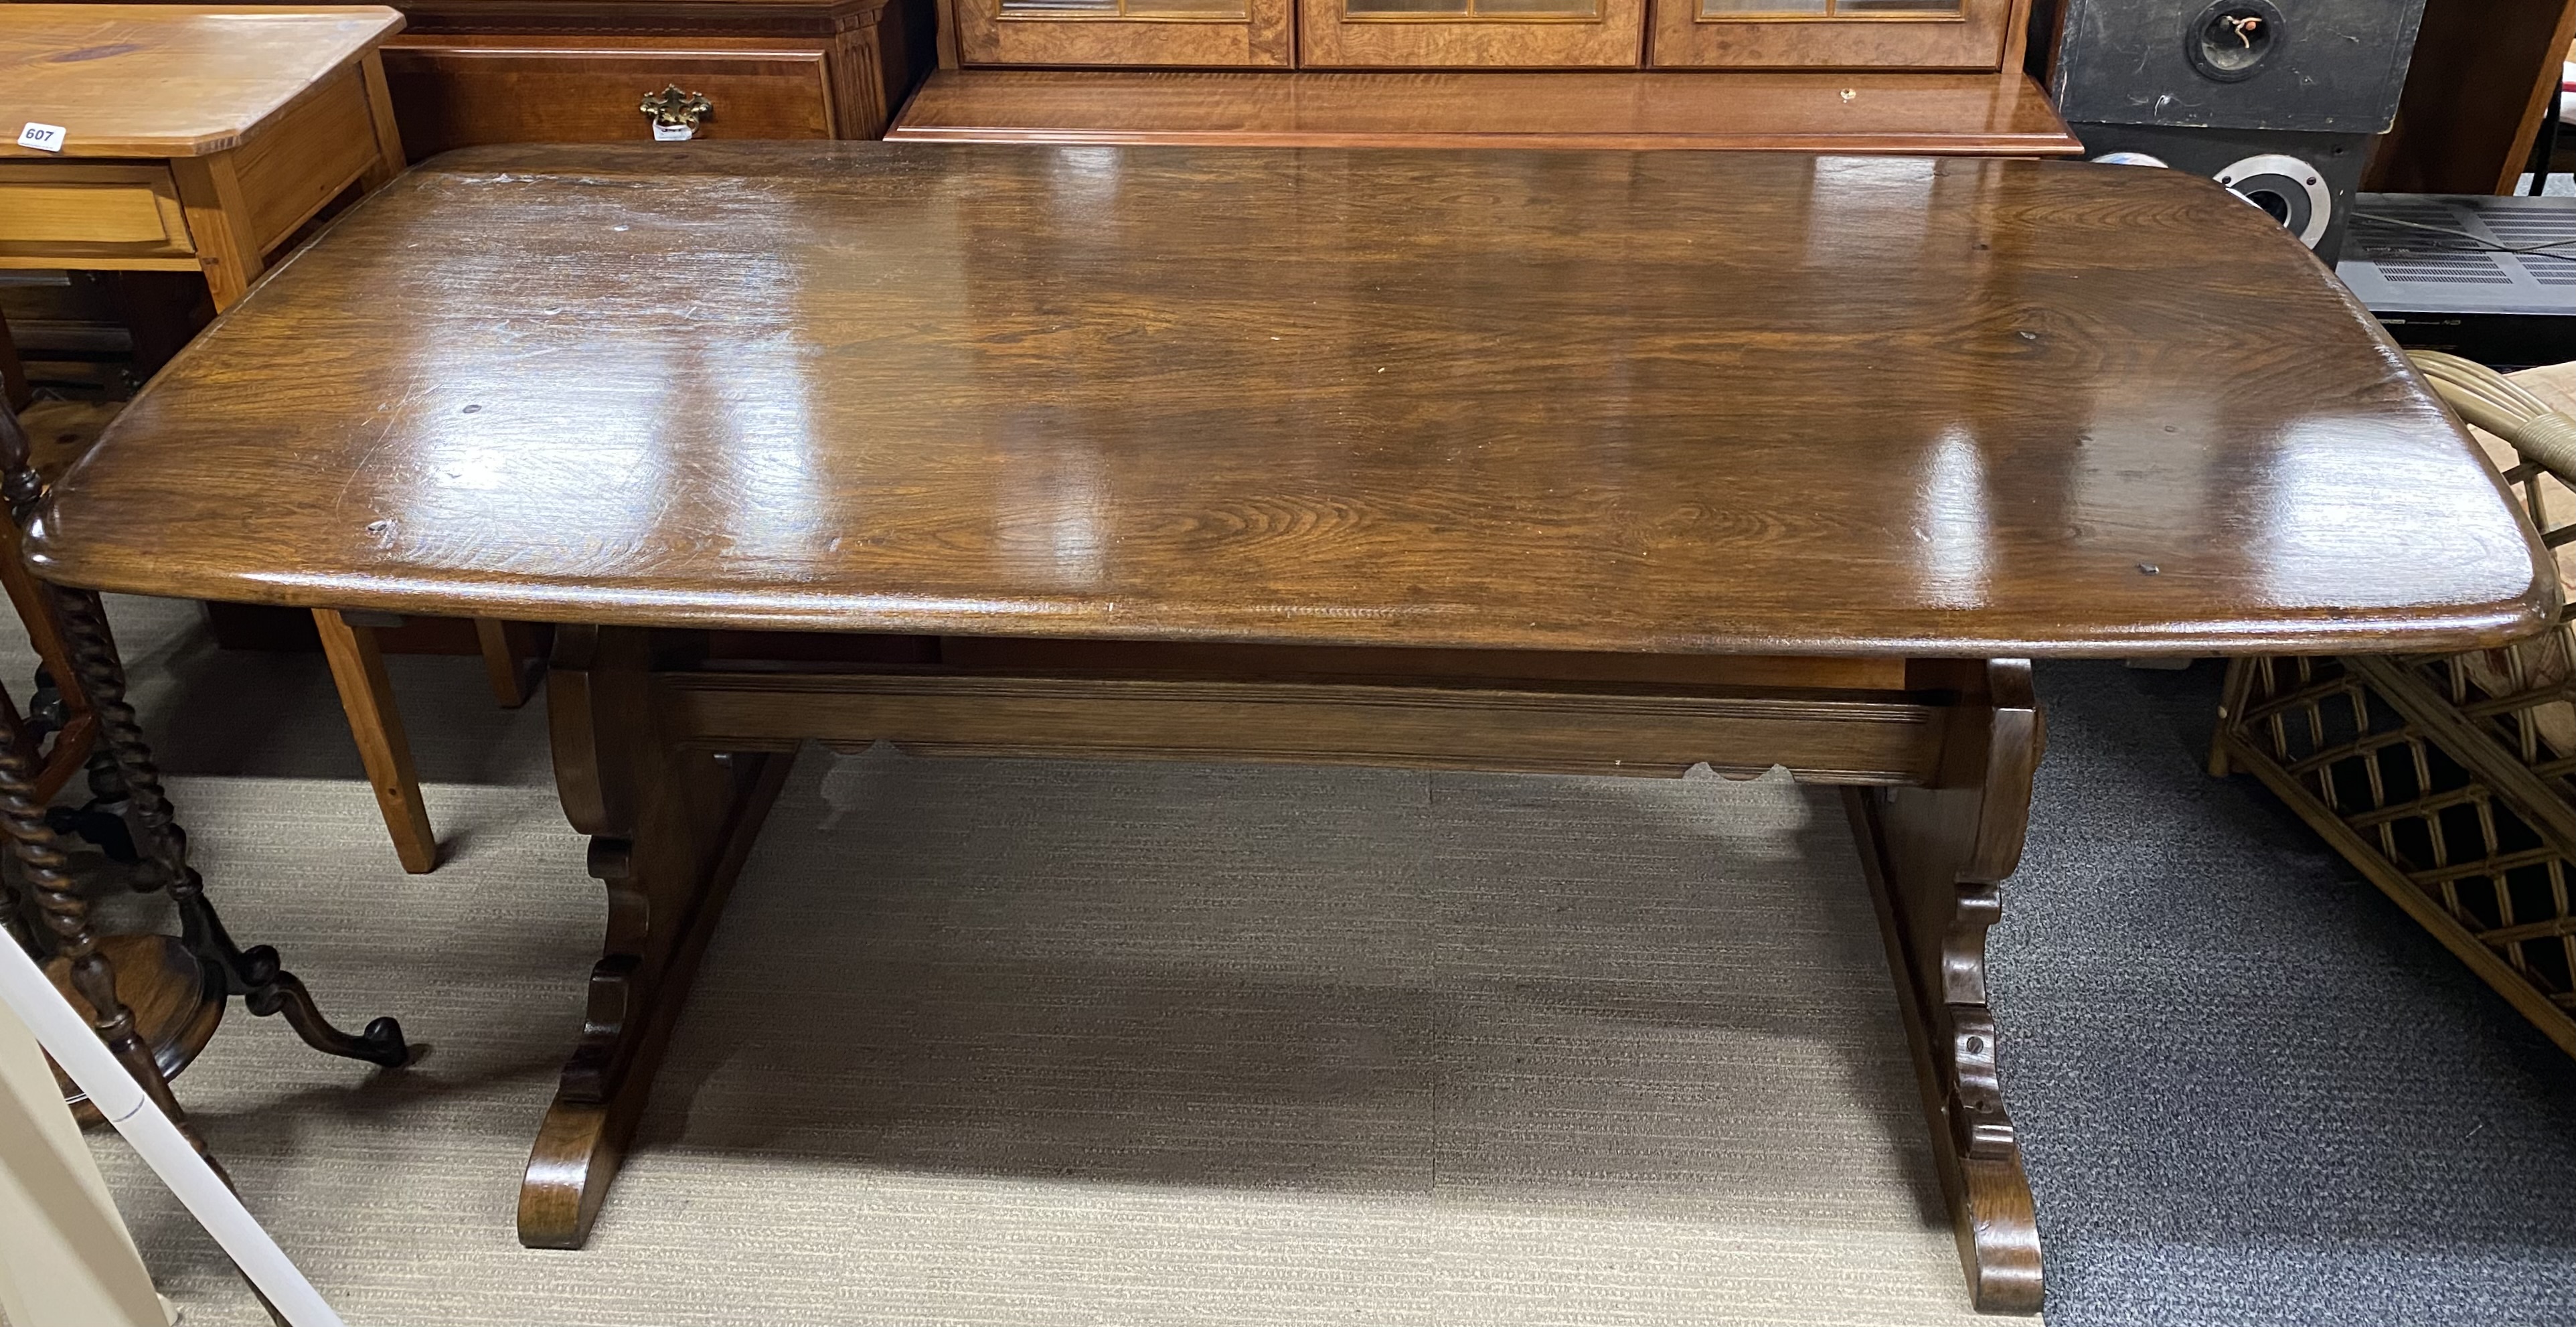 An Ercol 'Old Colonial' oak refectory table with antique waxed finish, L. 183cm.